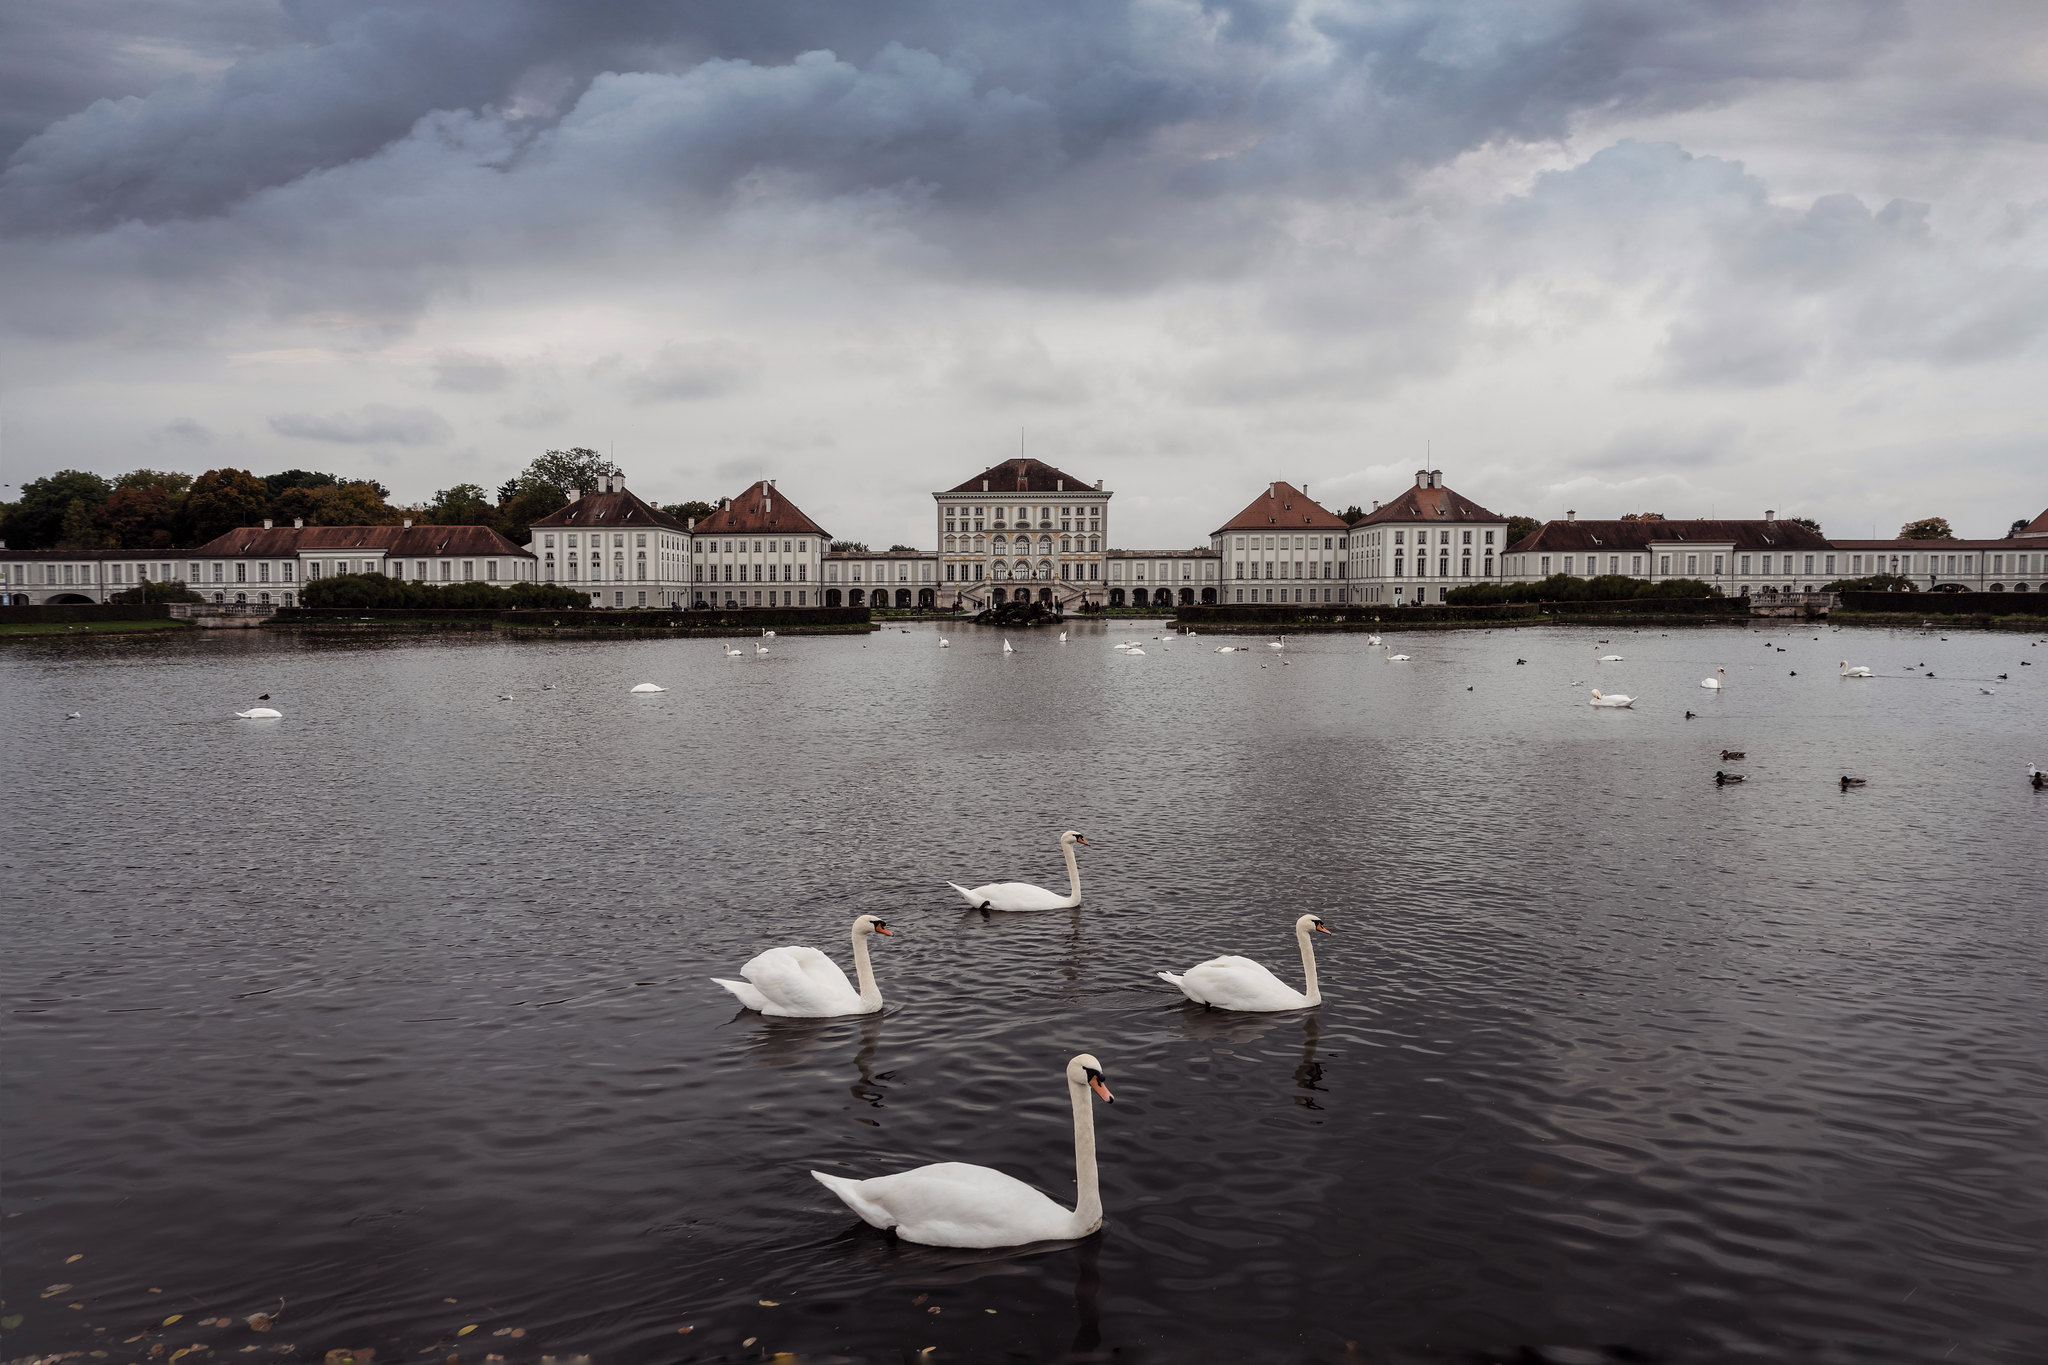 Swans of the Nymphenburg Palace